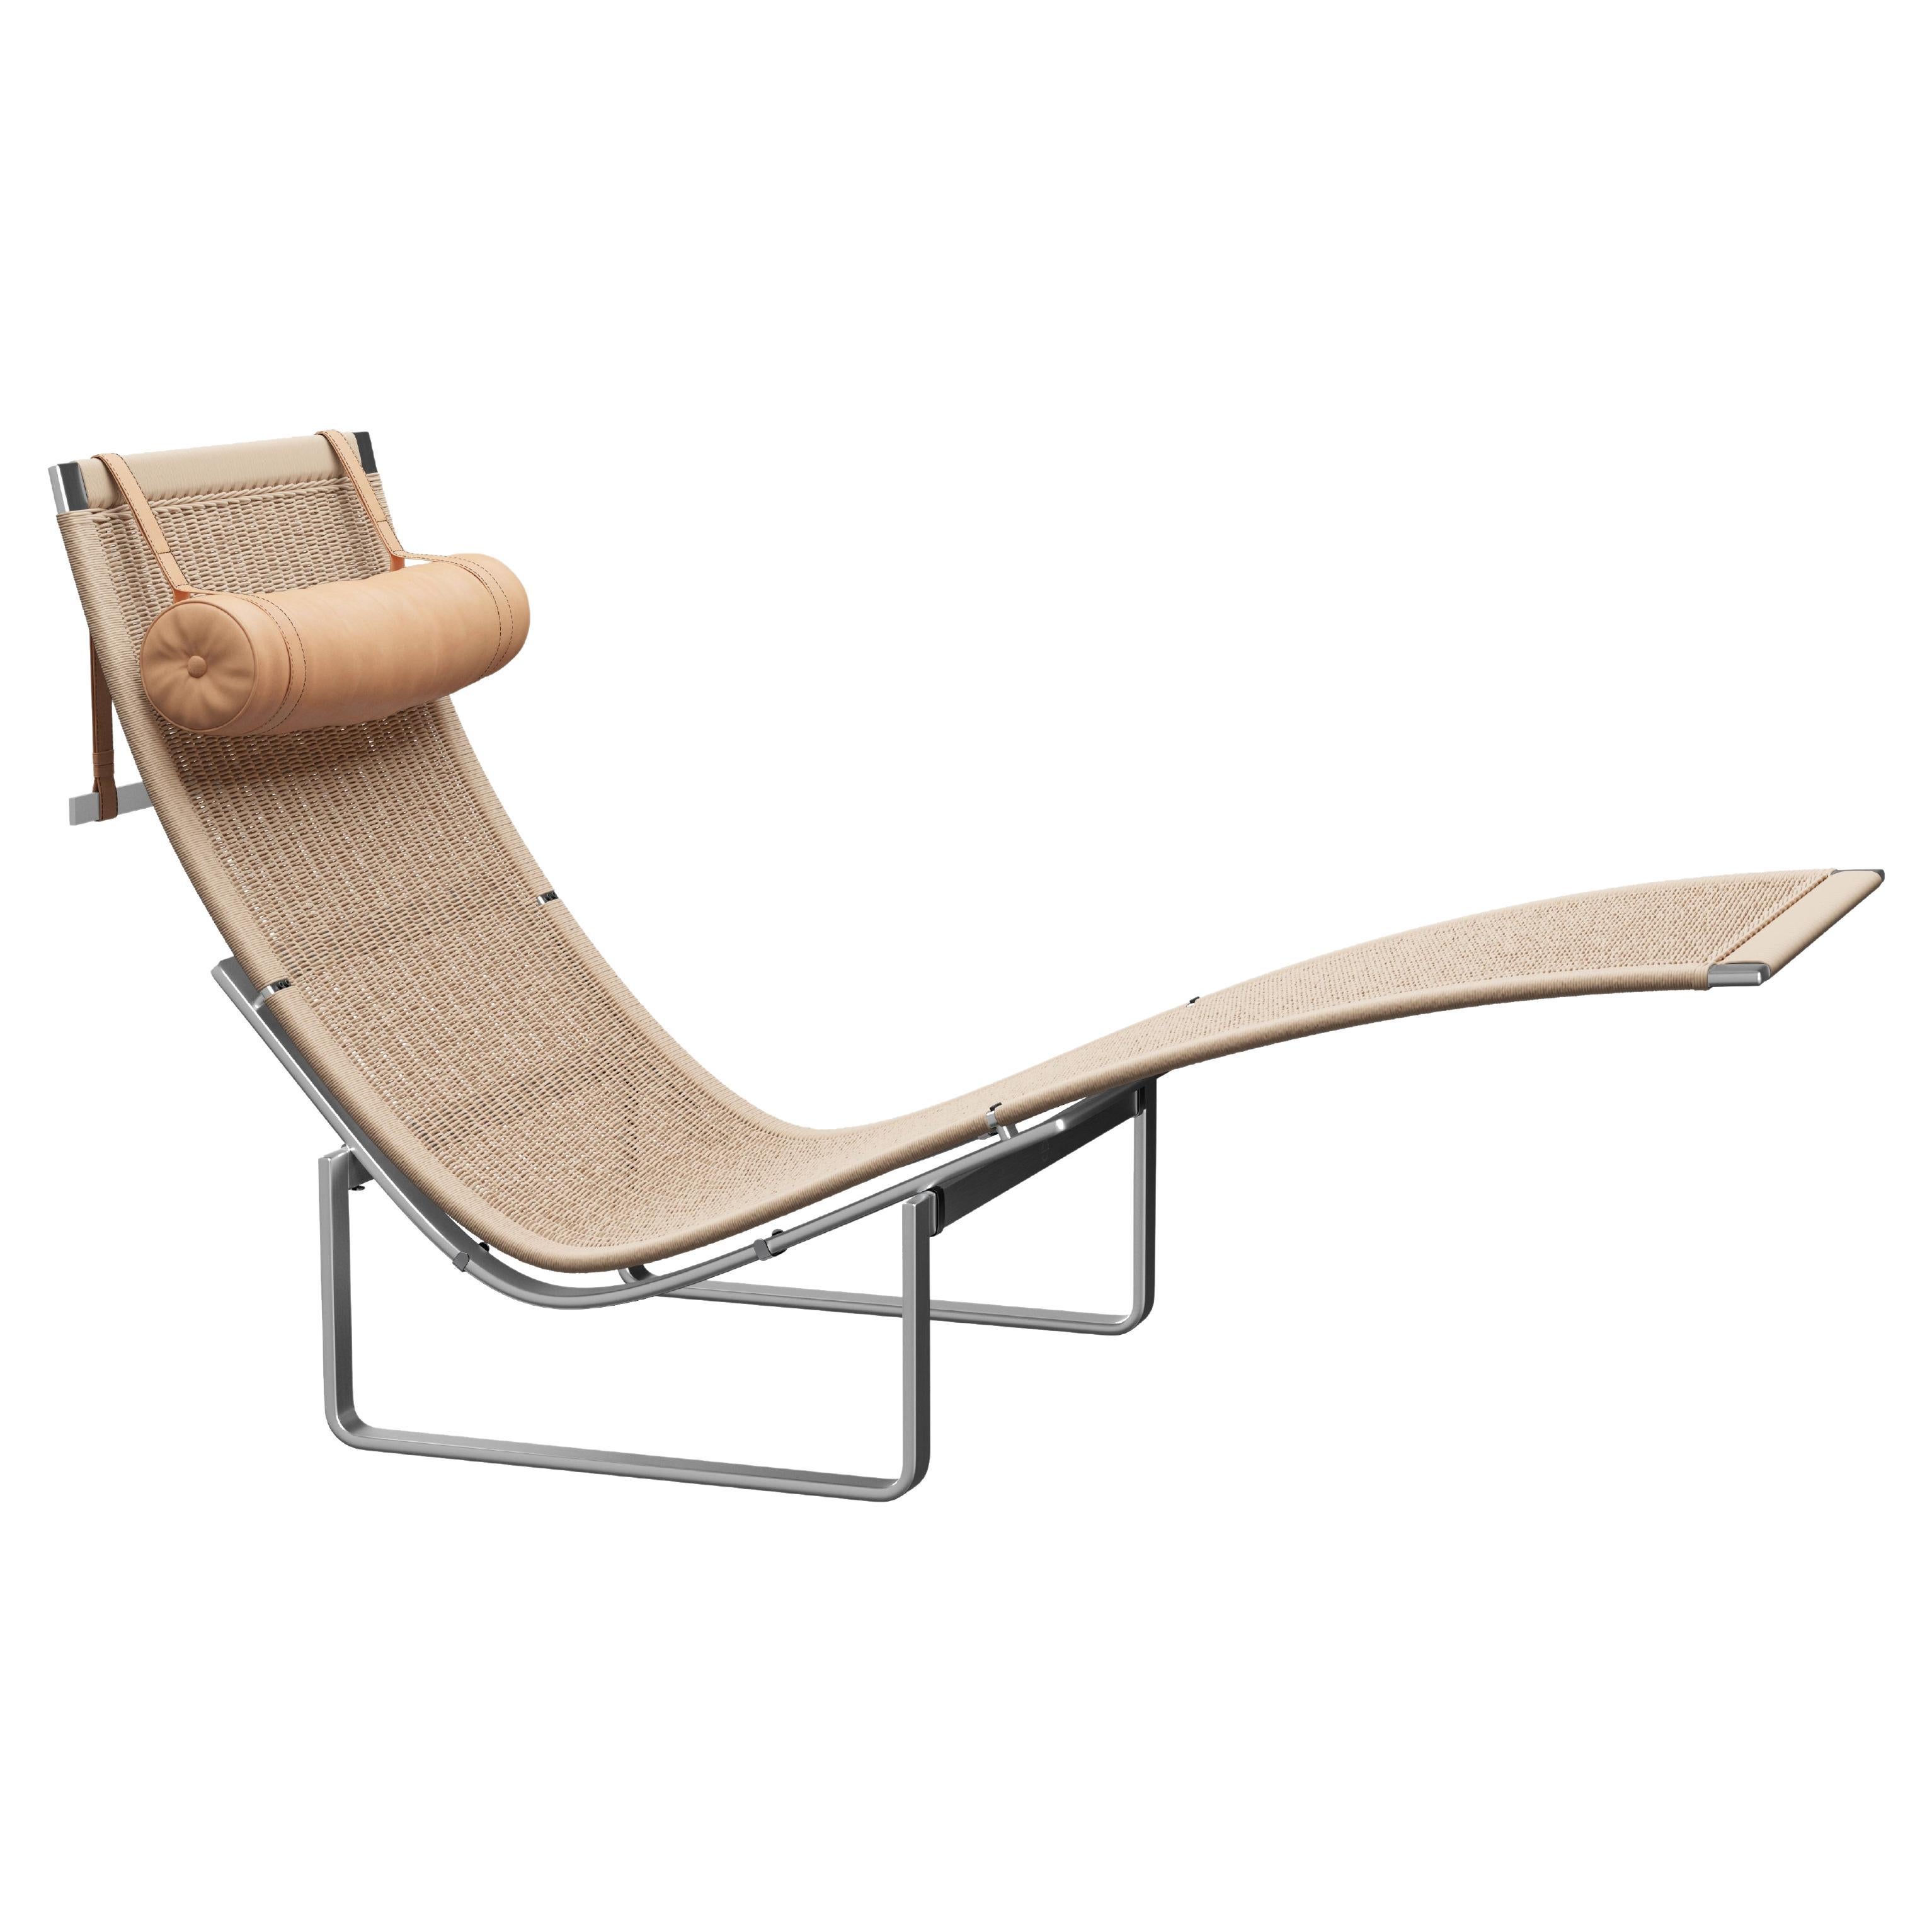 Poul Kjærholm 'PK24' Wicker Lounge Chair for Fritz Hansen with Leather Headrest For Sale